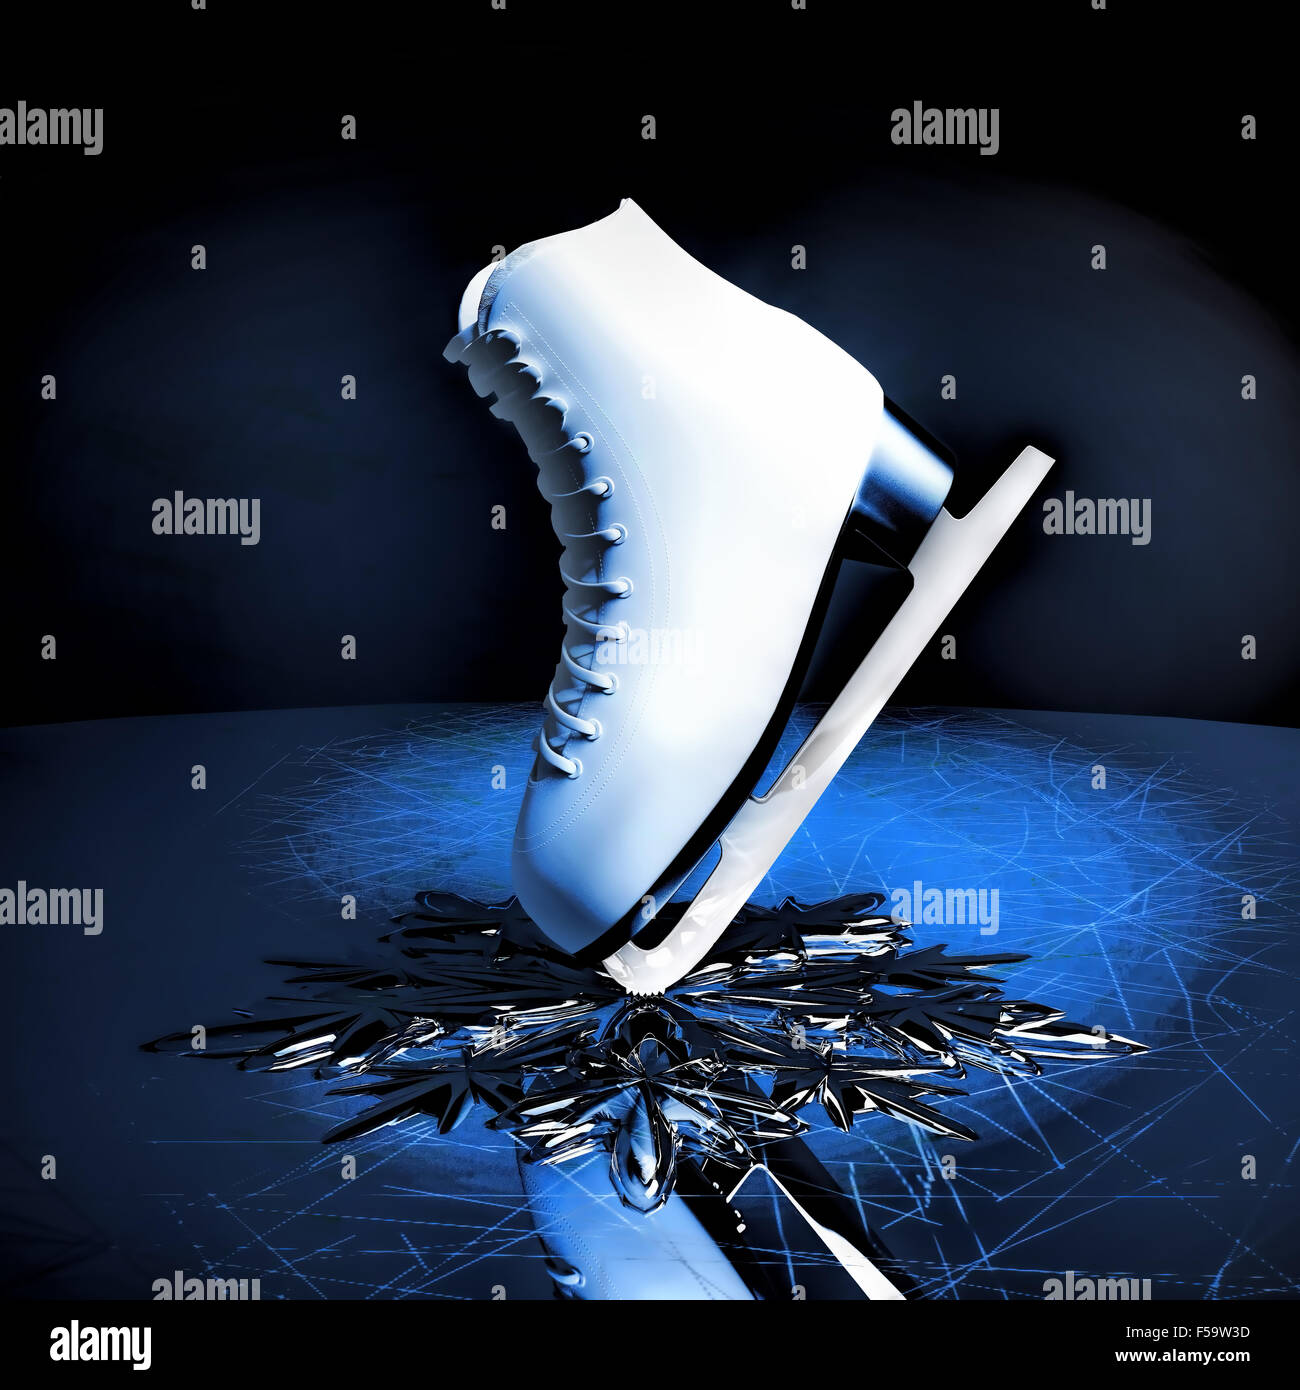 Close up view of The skat for figure skating and a snowflake on skating rink ice. Stock Photo